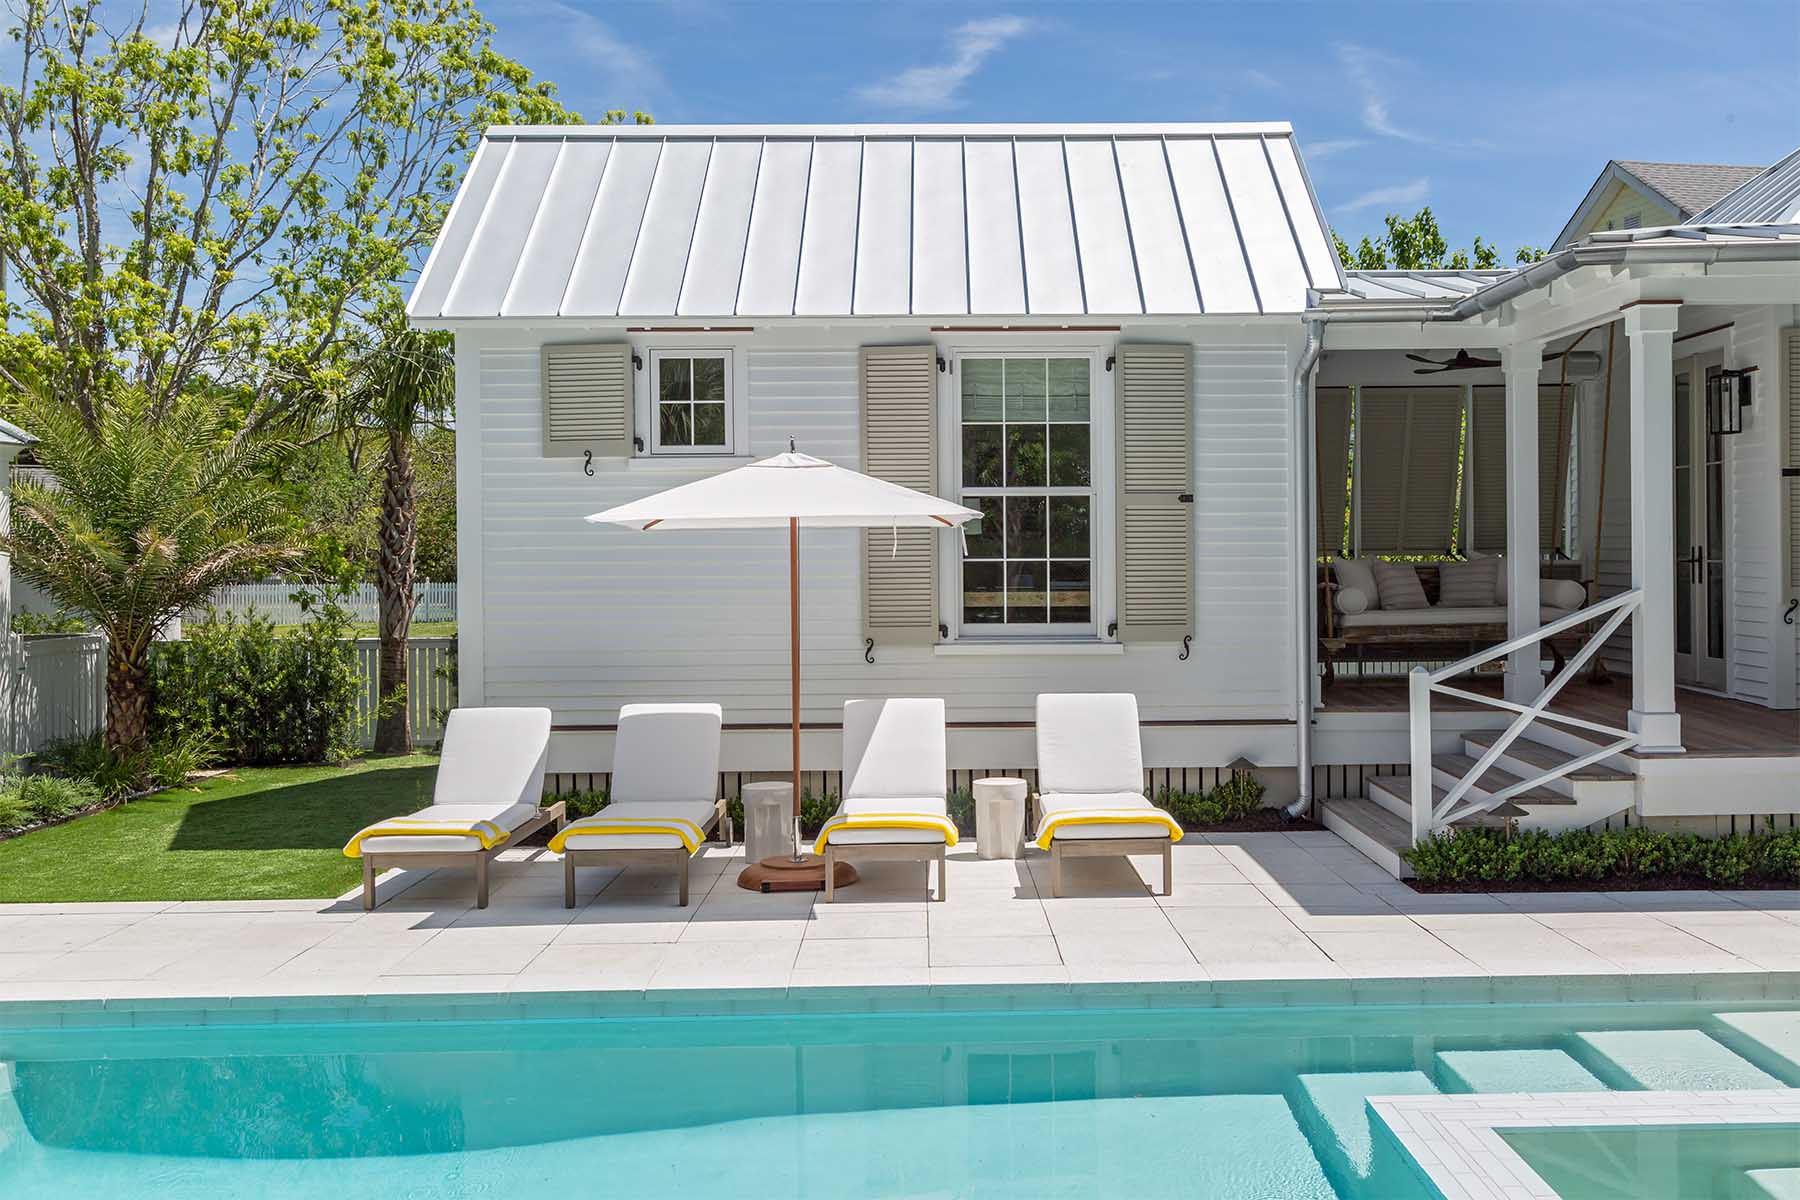 The step pavers at this refurbished home merge into the pool tiles